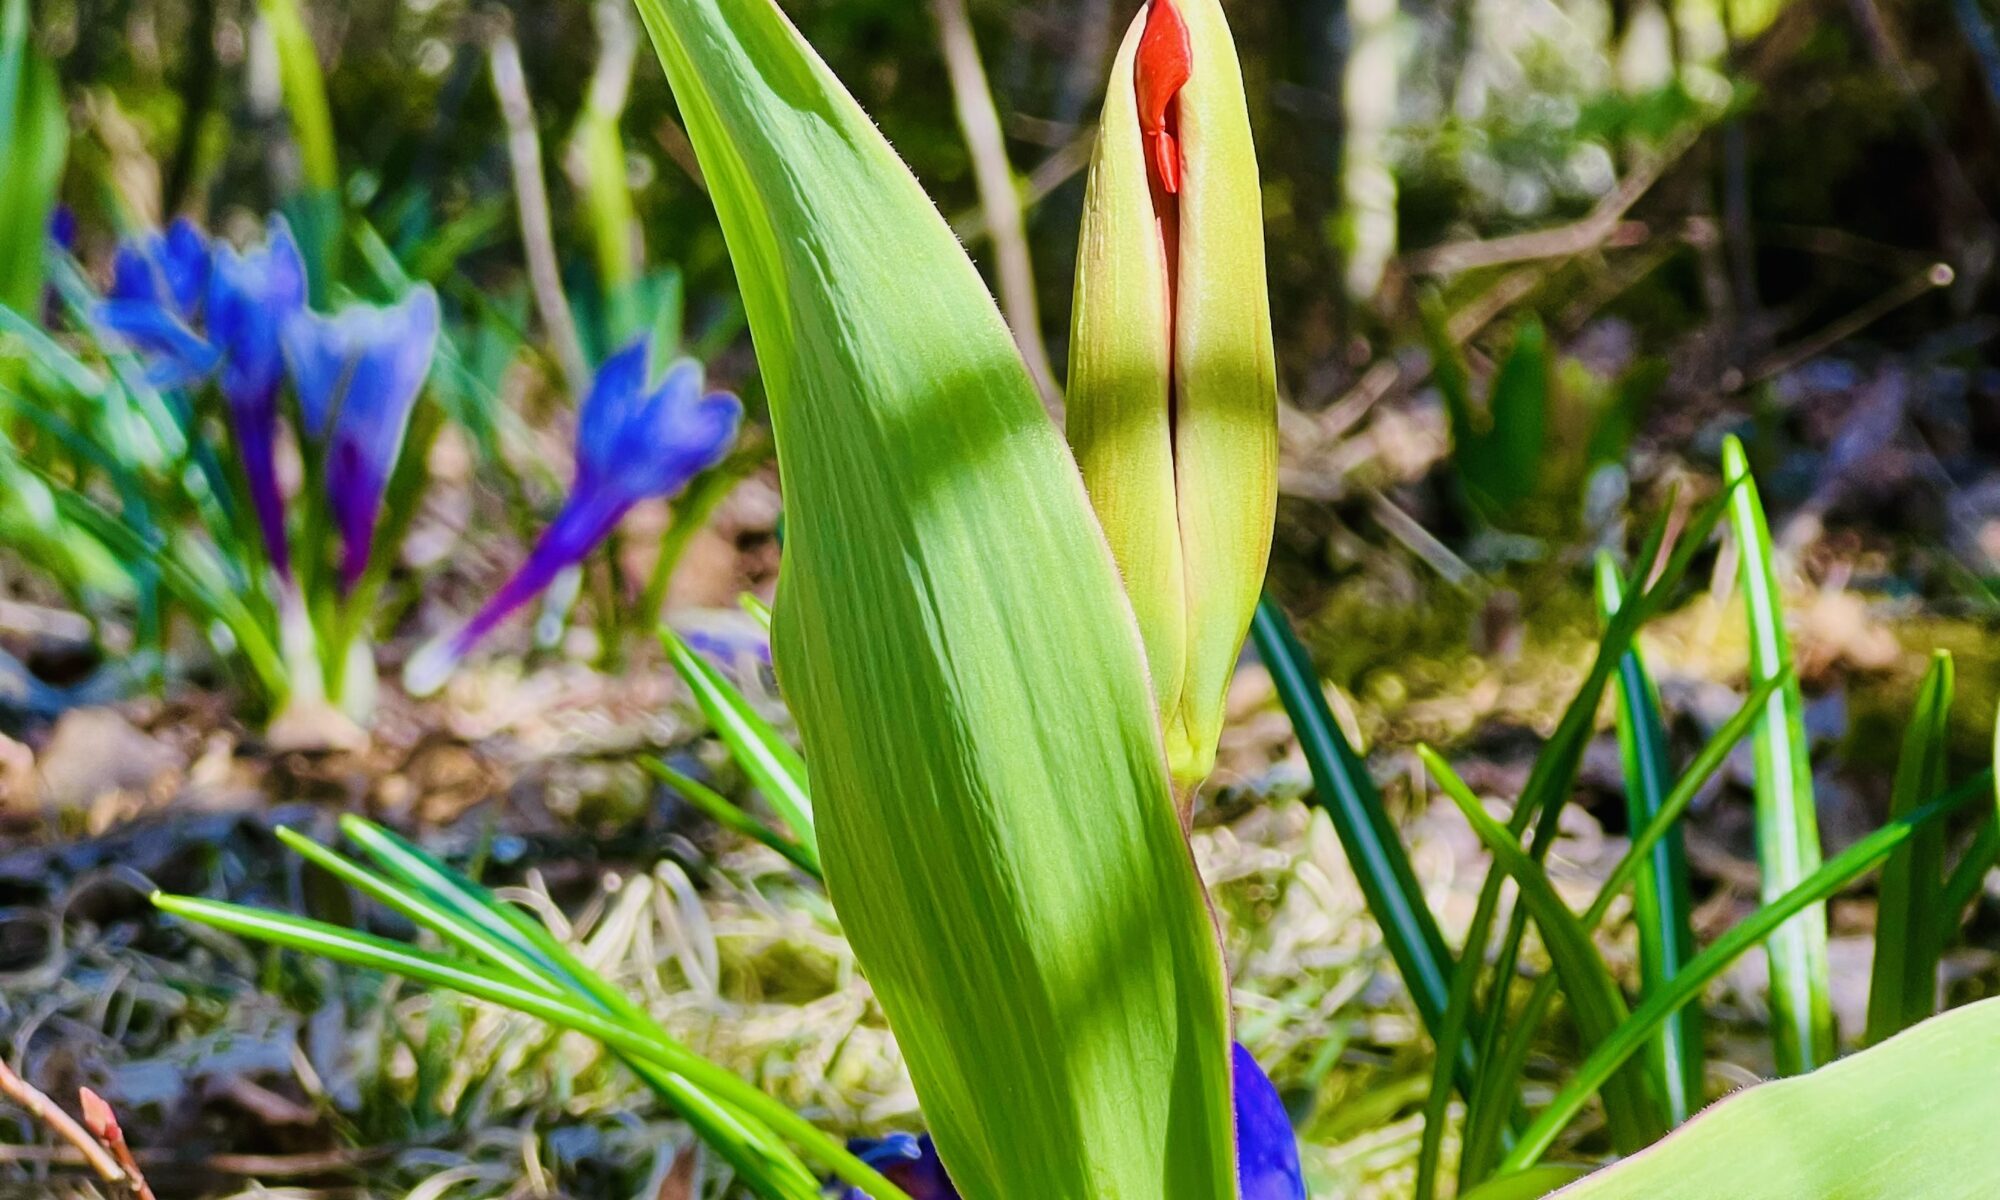 red tulip beginning to open in Spring with purple crocuses in the back ground in the margin of a wooded area